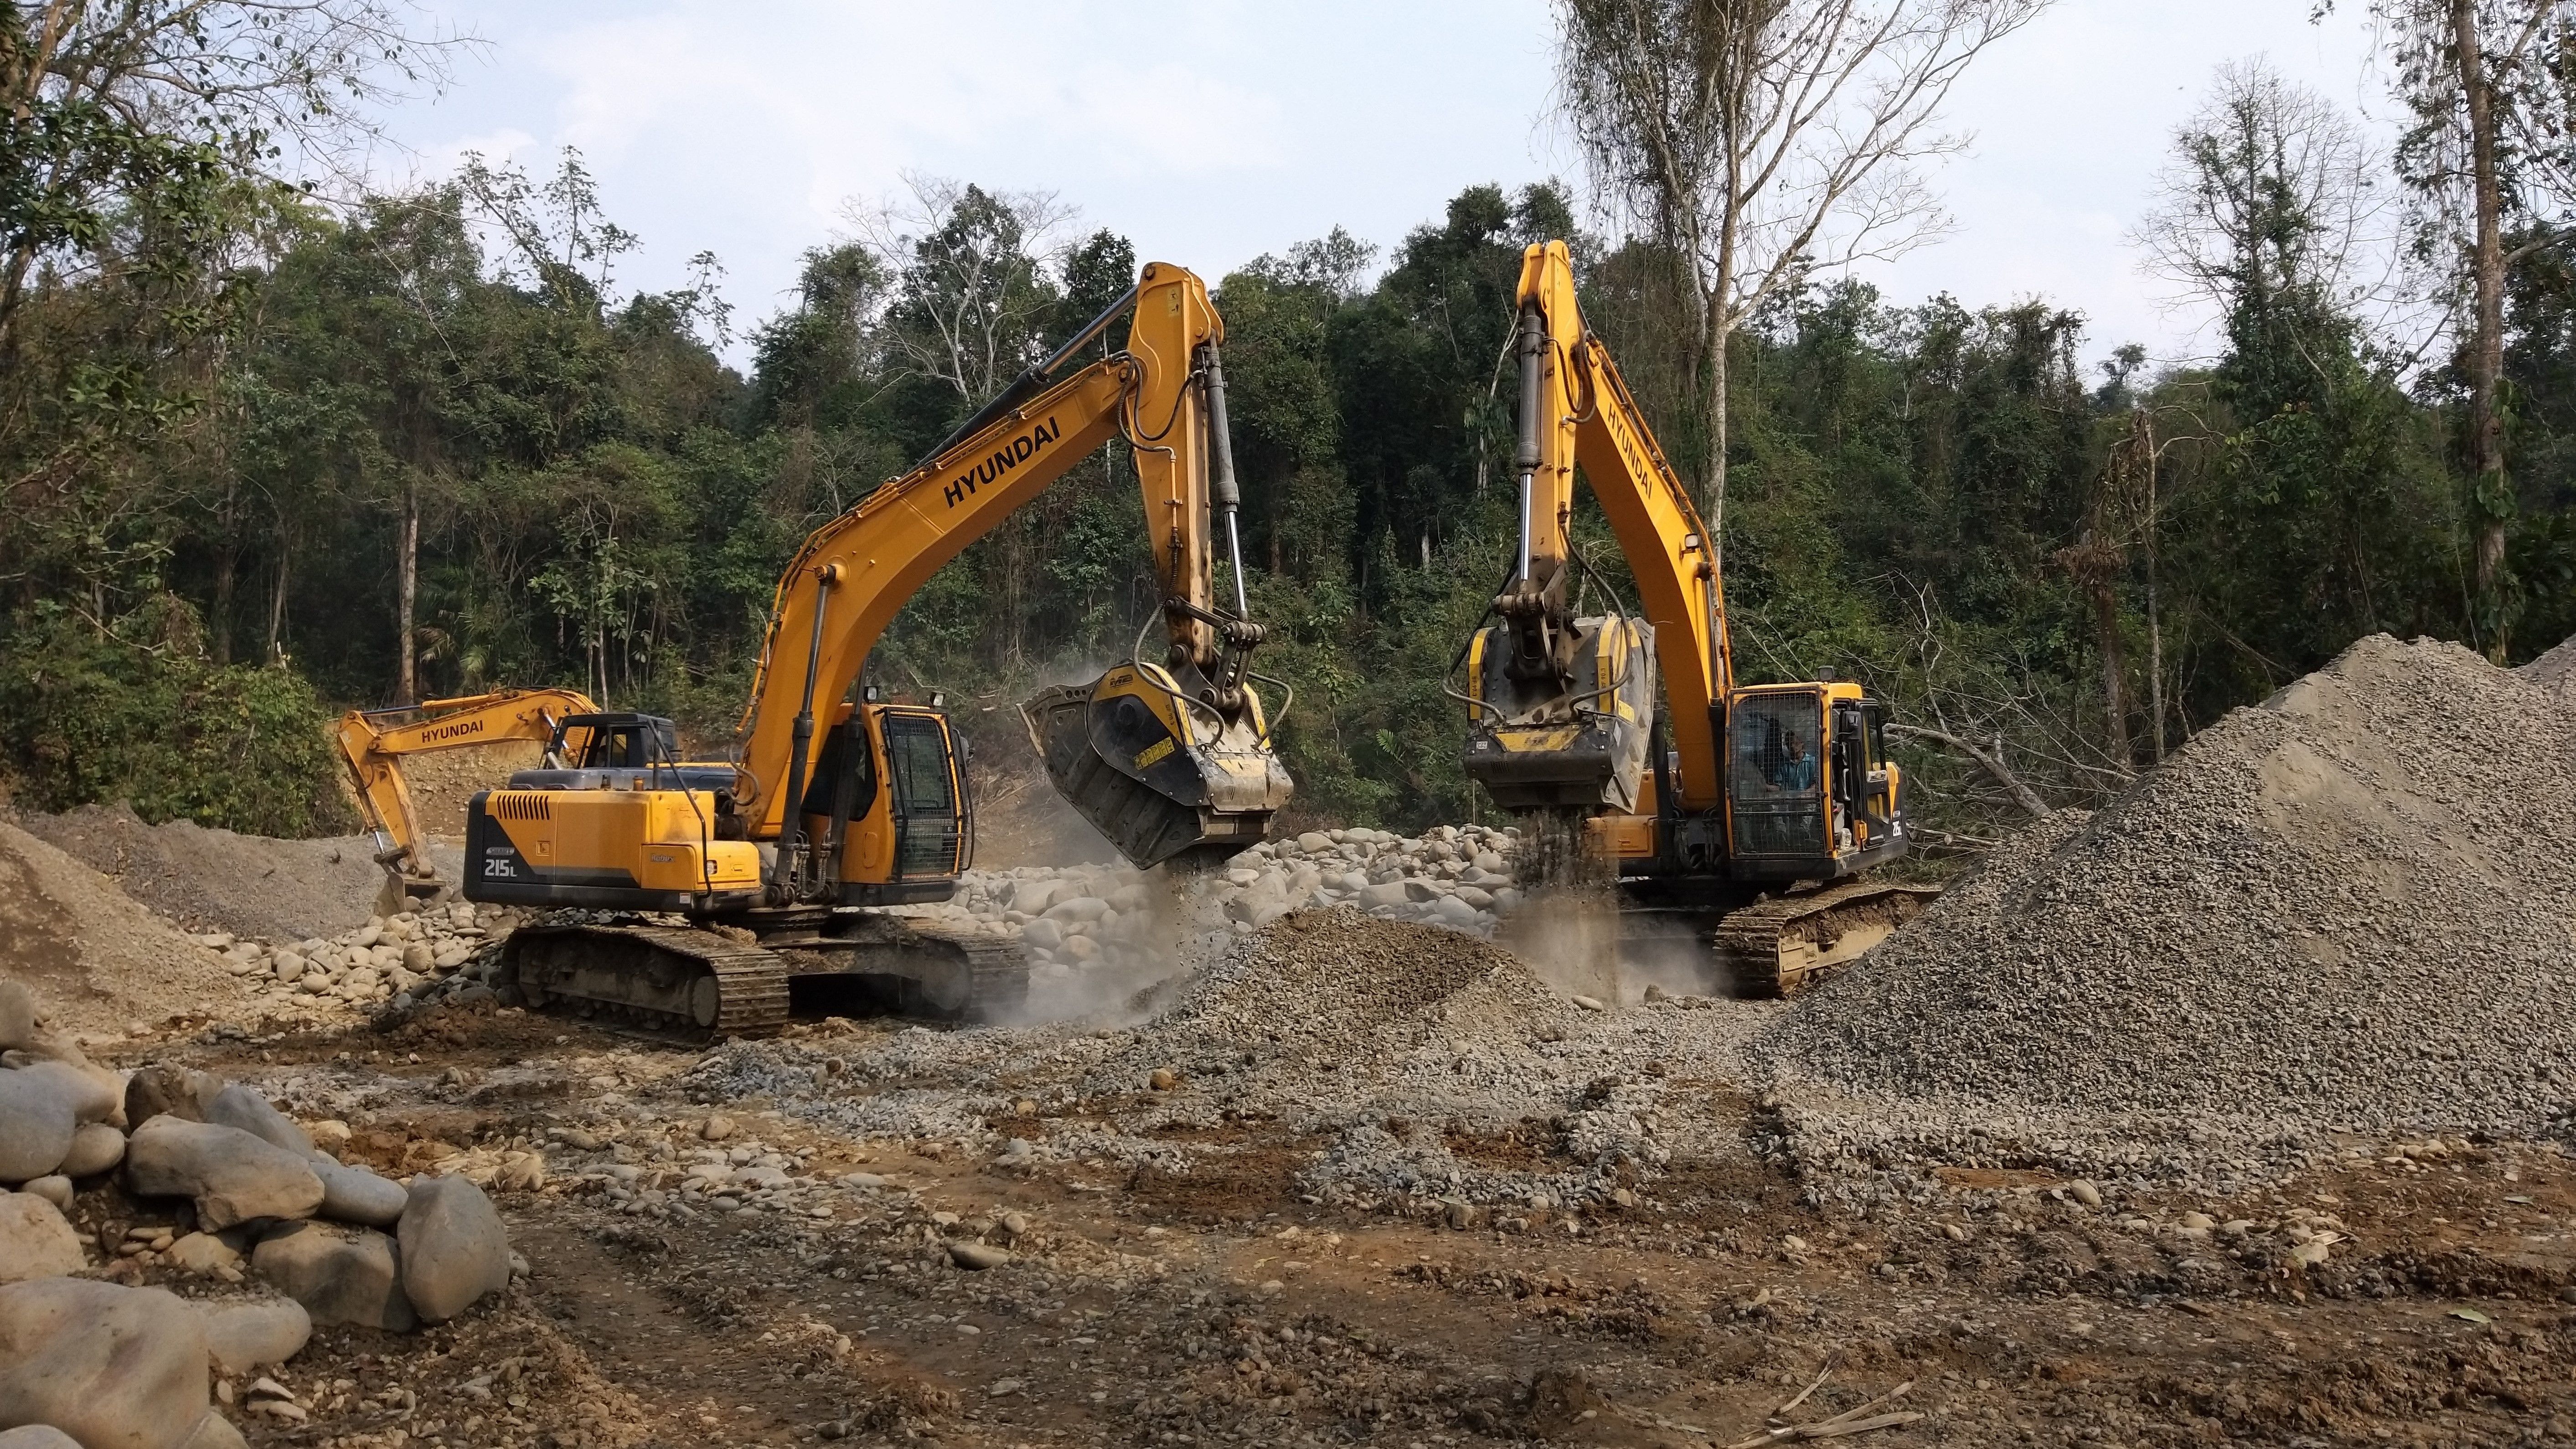 MB-S18 screening bucket and the BF90.3 crusher bucket attached to an excavator and backhoe loader